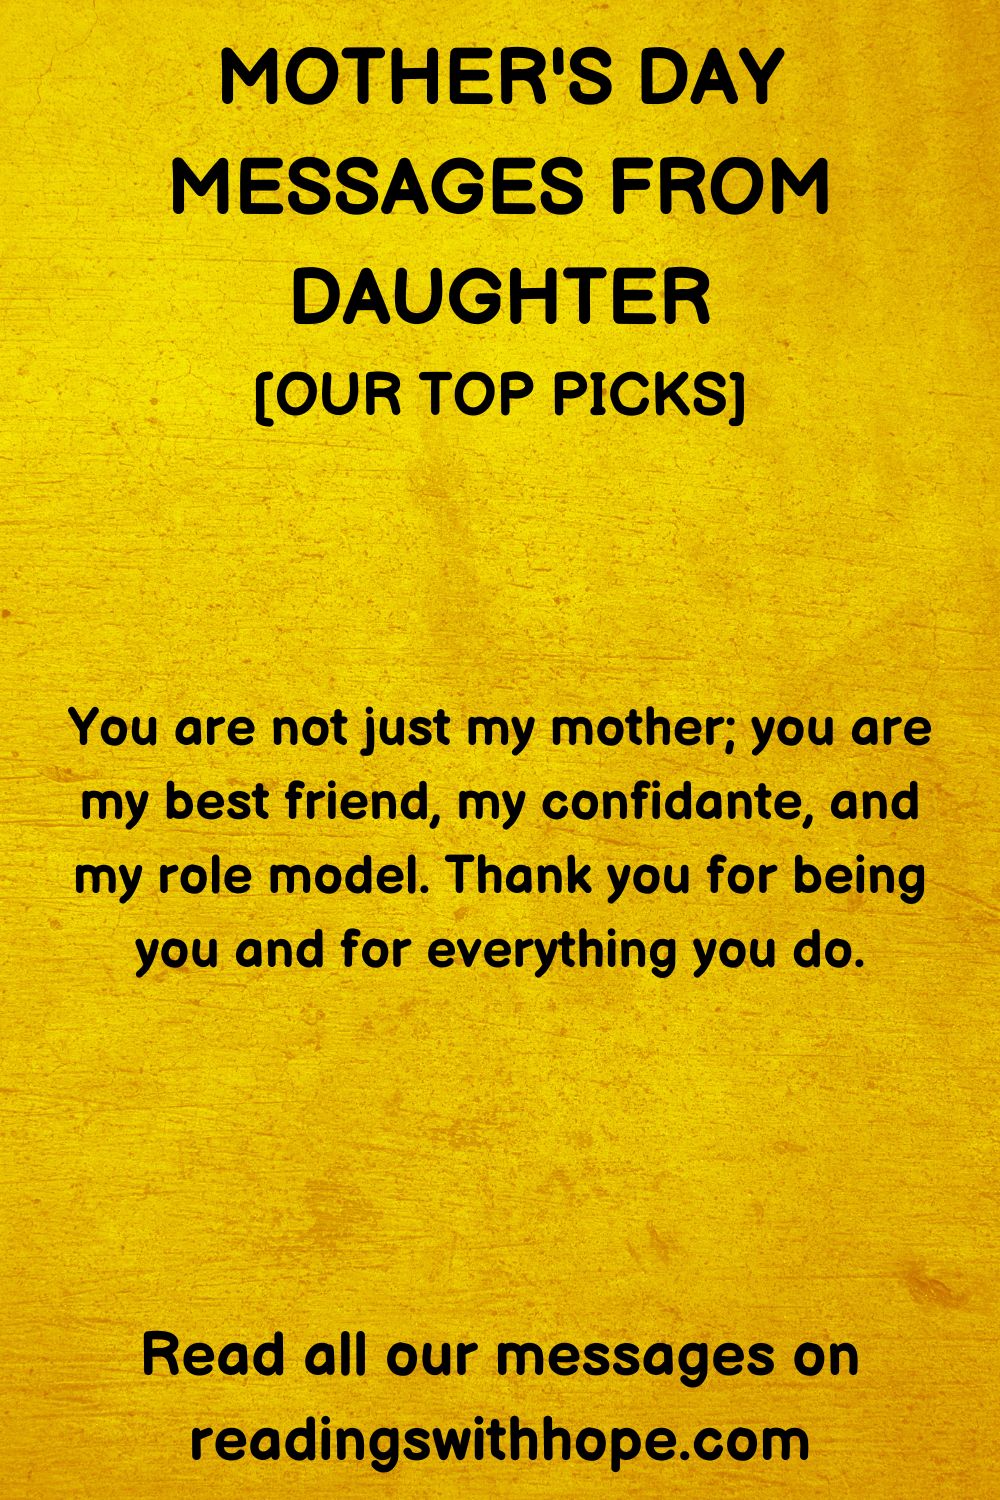 46 Mother's Day Messages From Daughter